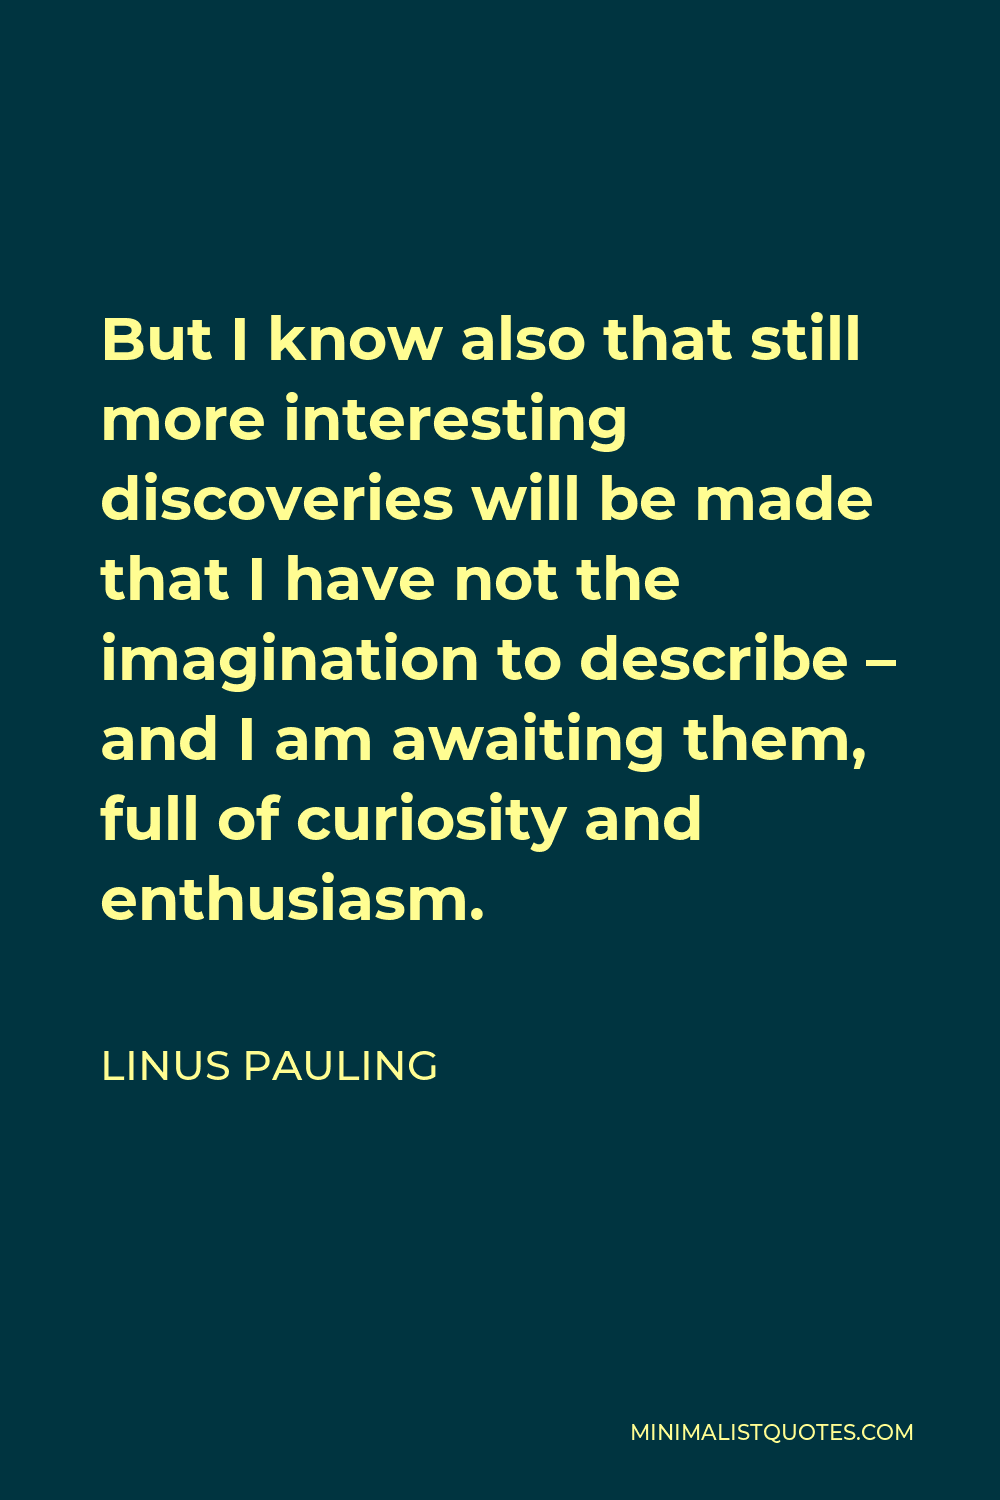 Linus Pauling Quote - But I know also that still more interesting discoveries will be made that I have not the imagination to describe – and I am awaiting them, full of curiosity and enthusiasm.